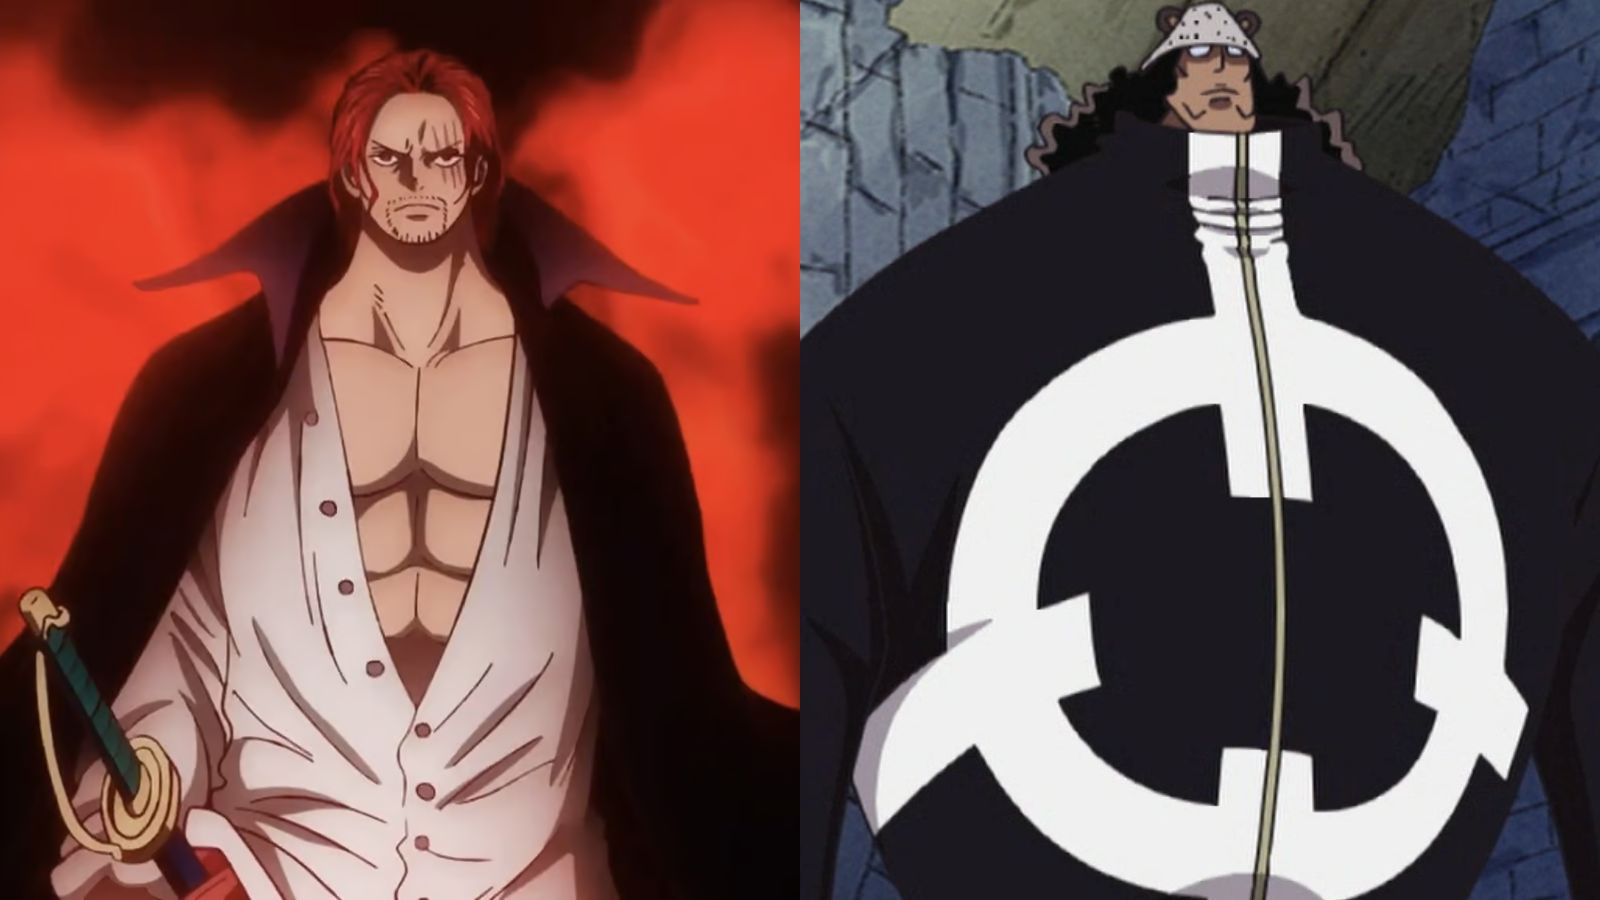 Here Are 10 Main Villains in One Piece Movies from Weakest to